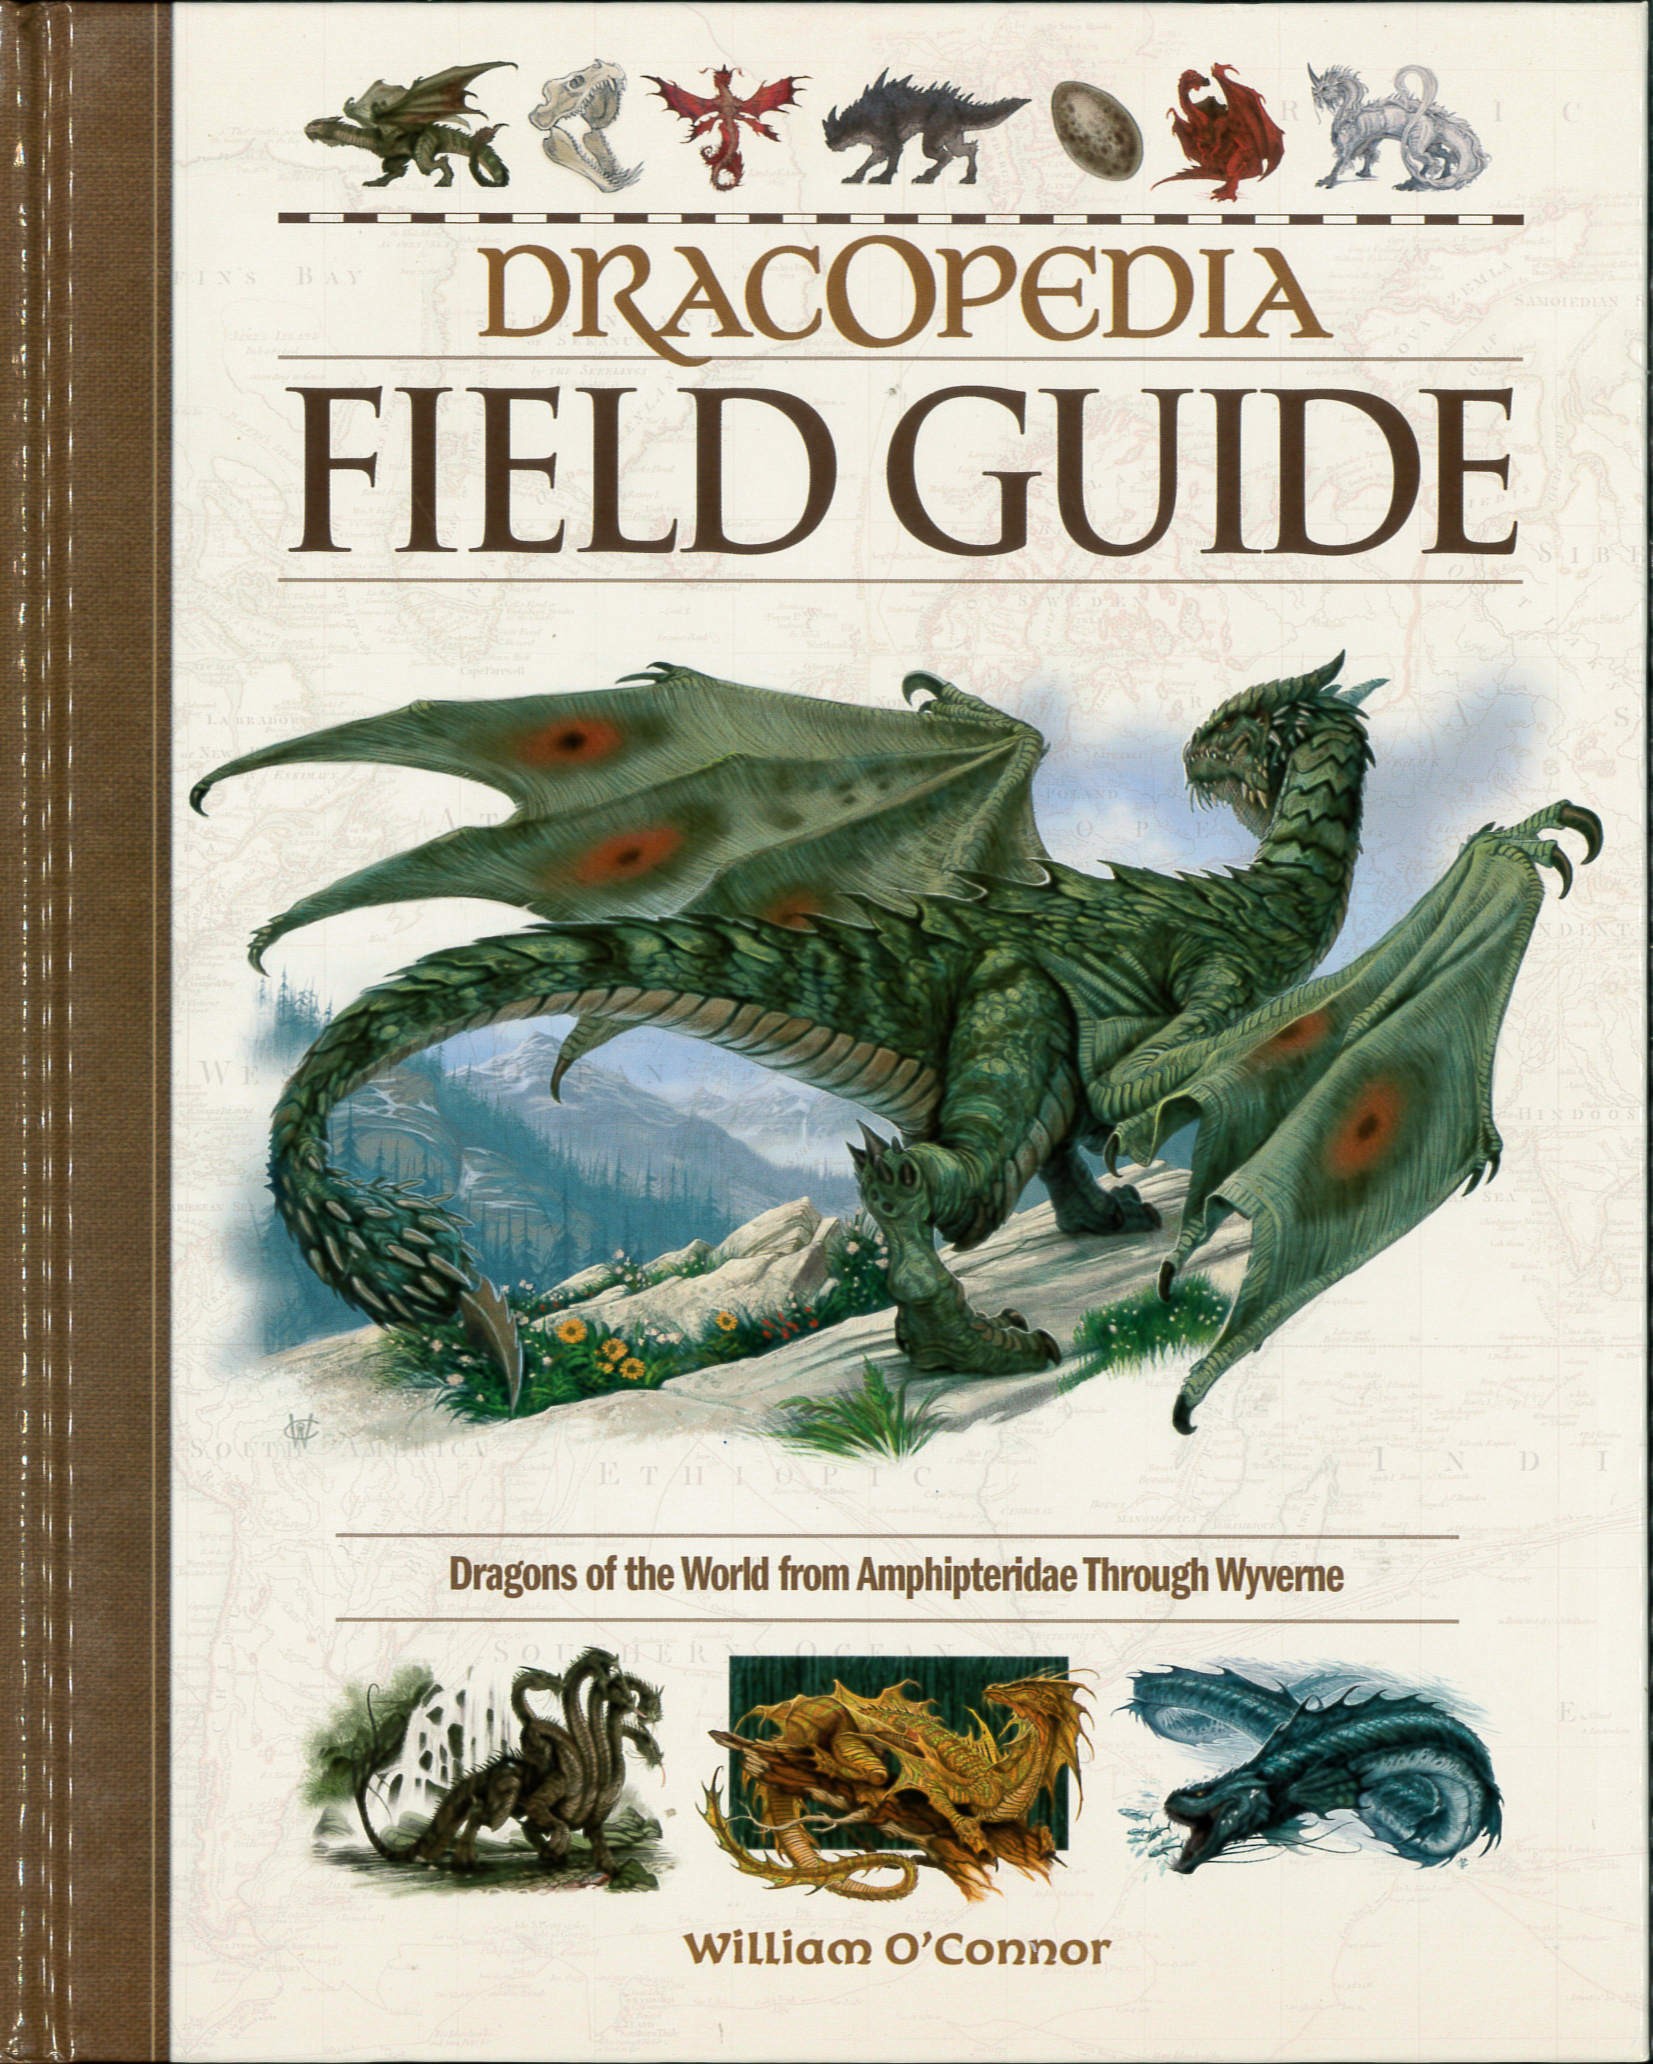 Dracopedia field guide : Dragons of the world from Amphipteridae through Wyvernae /